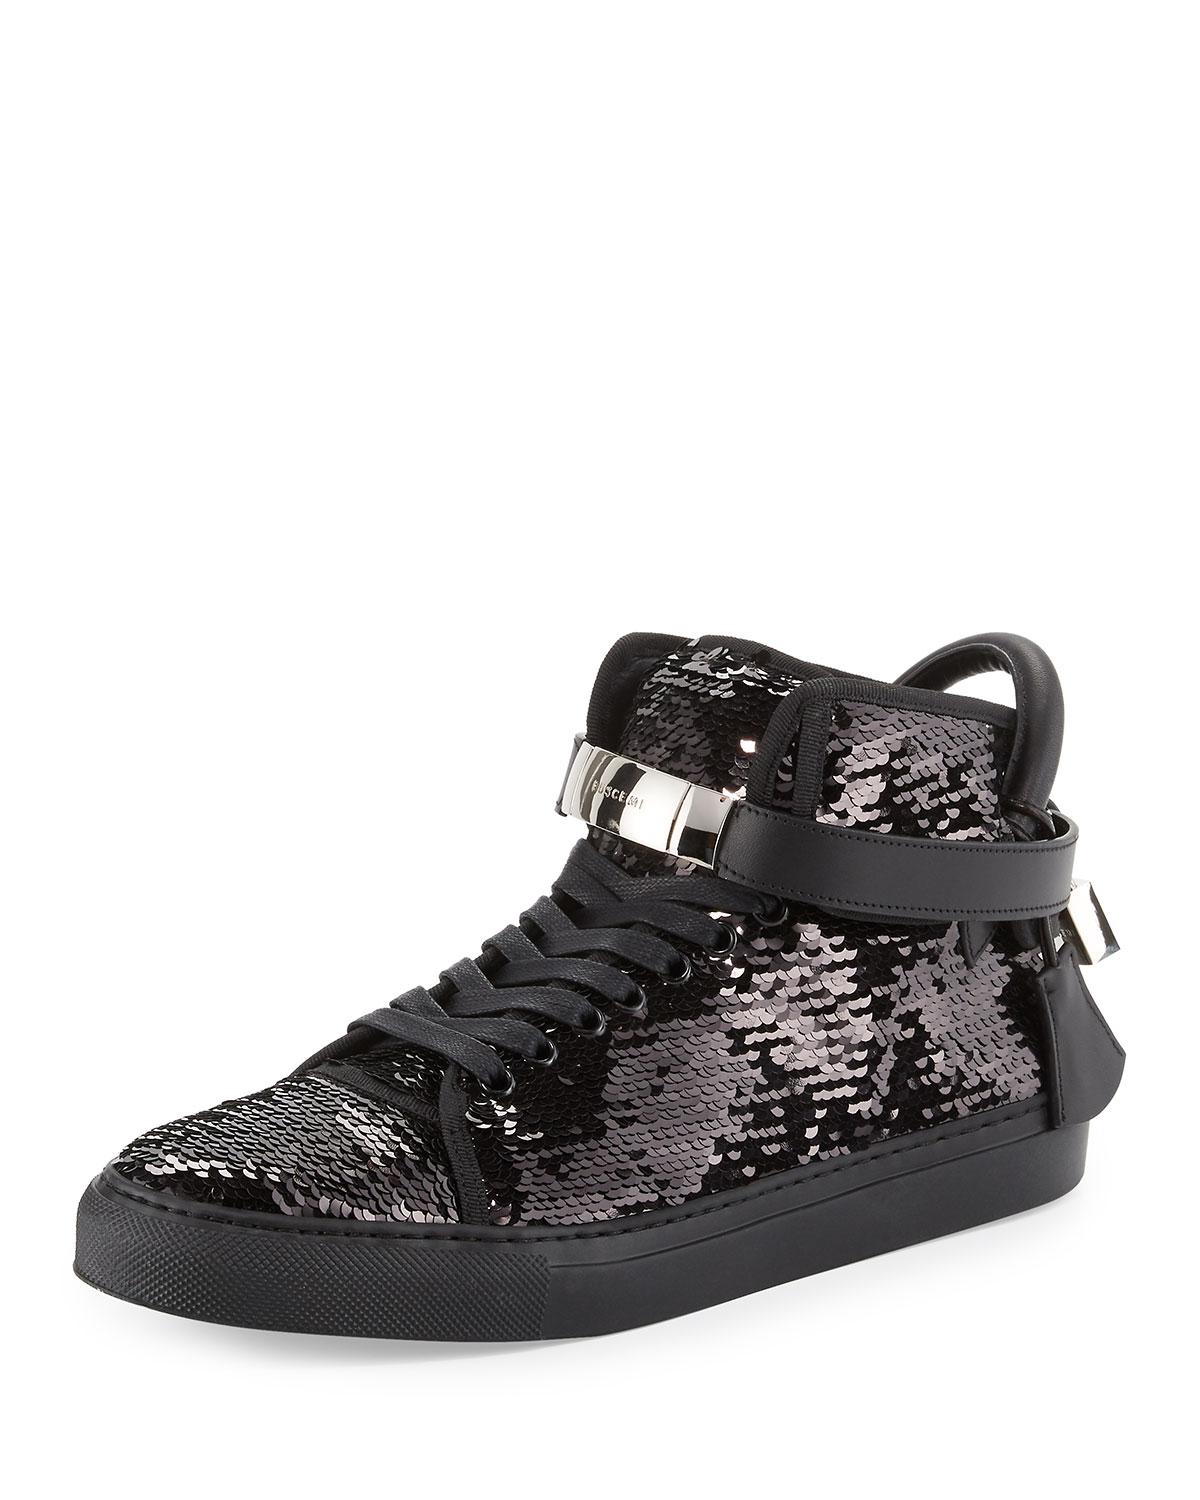 Buscemi Leather Men's 100mm Sequined High-top Sneakers Black for Men - Lyst